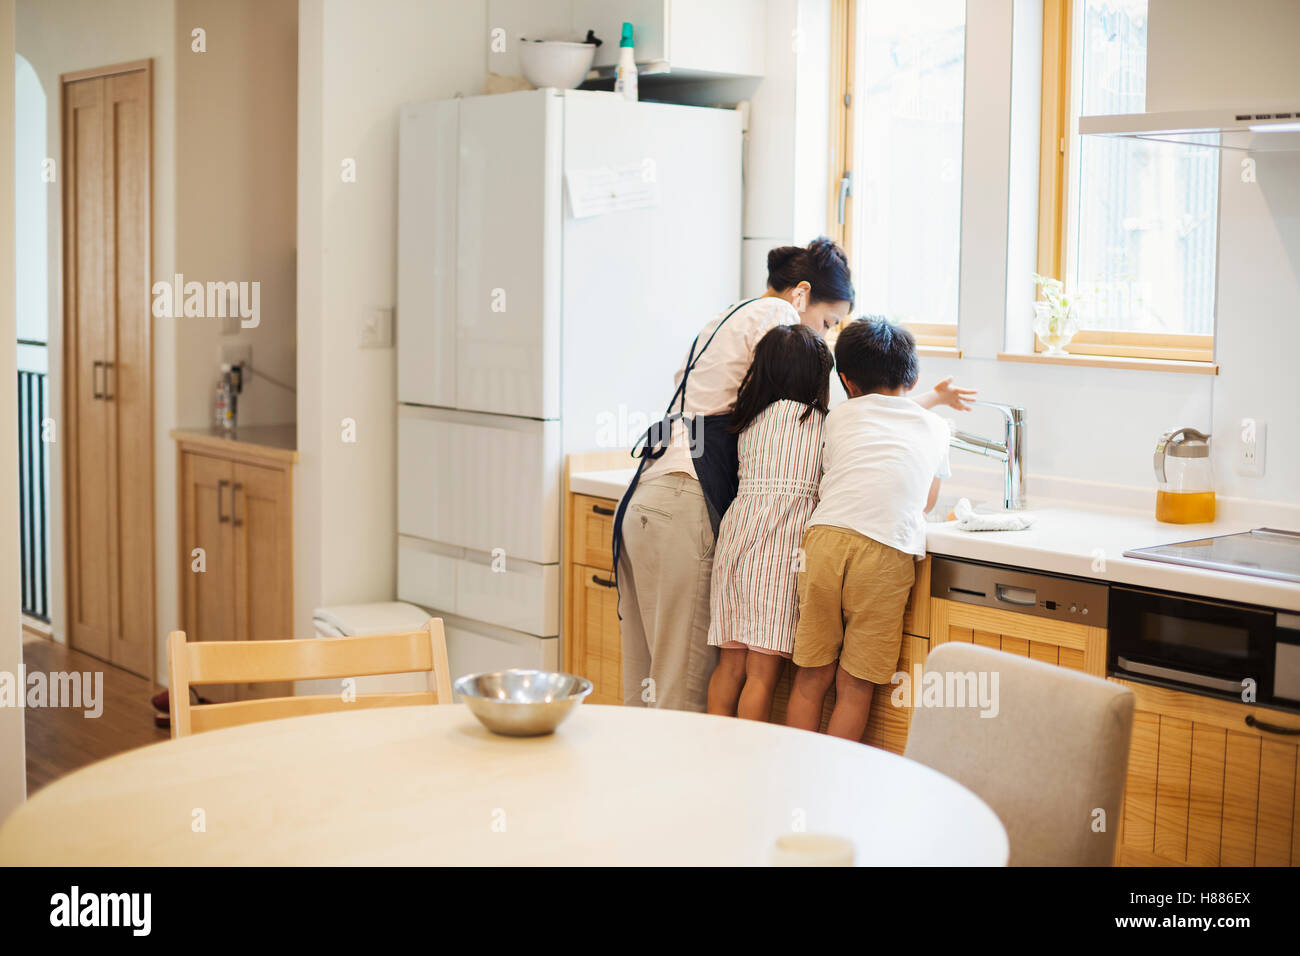 Family home. A mother and two children standing at the sink in a kitchen. Stock Photo